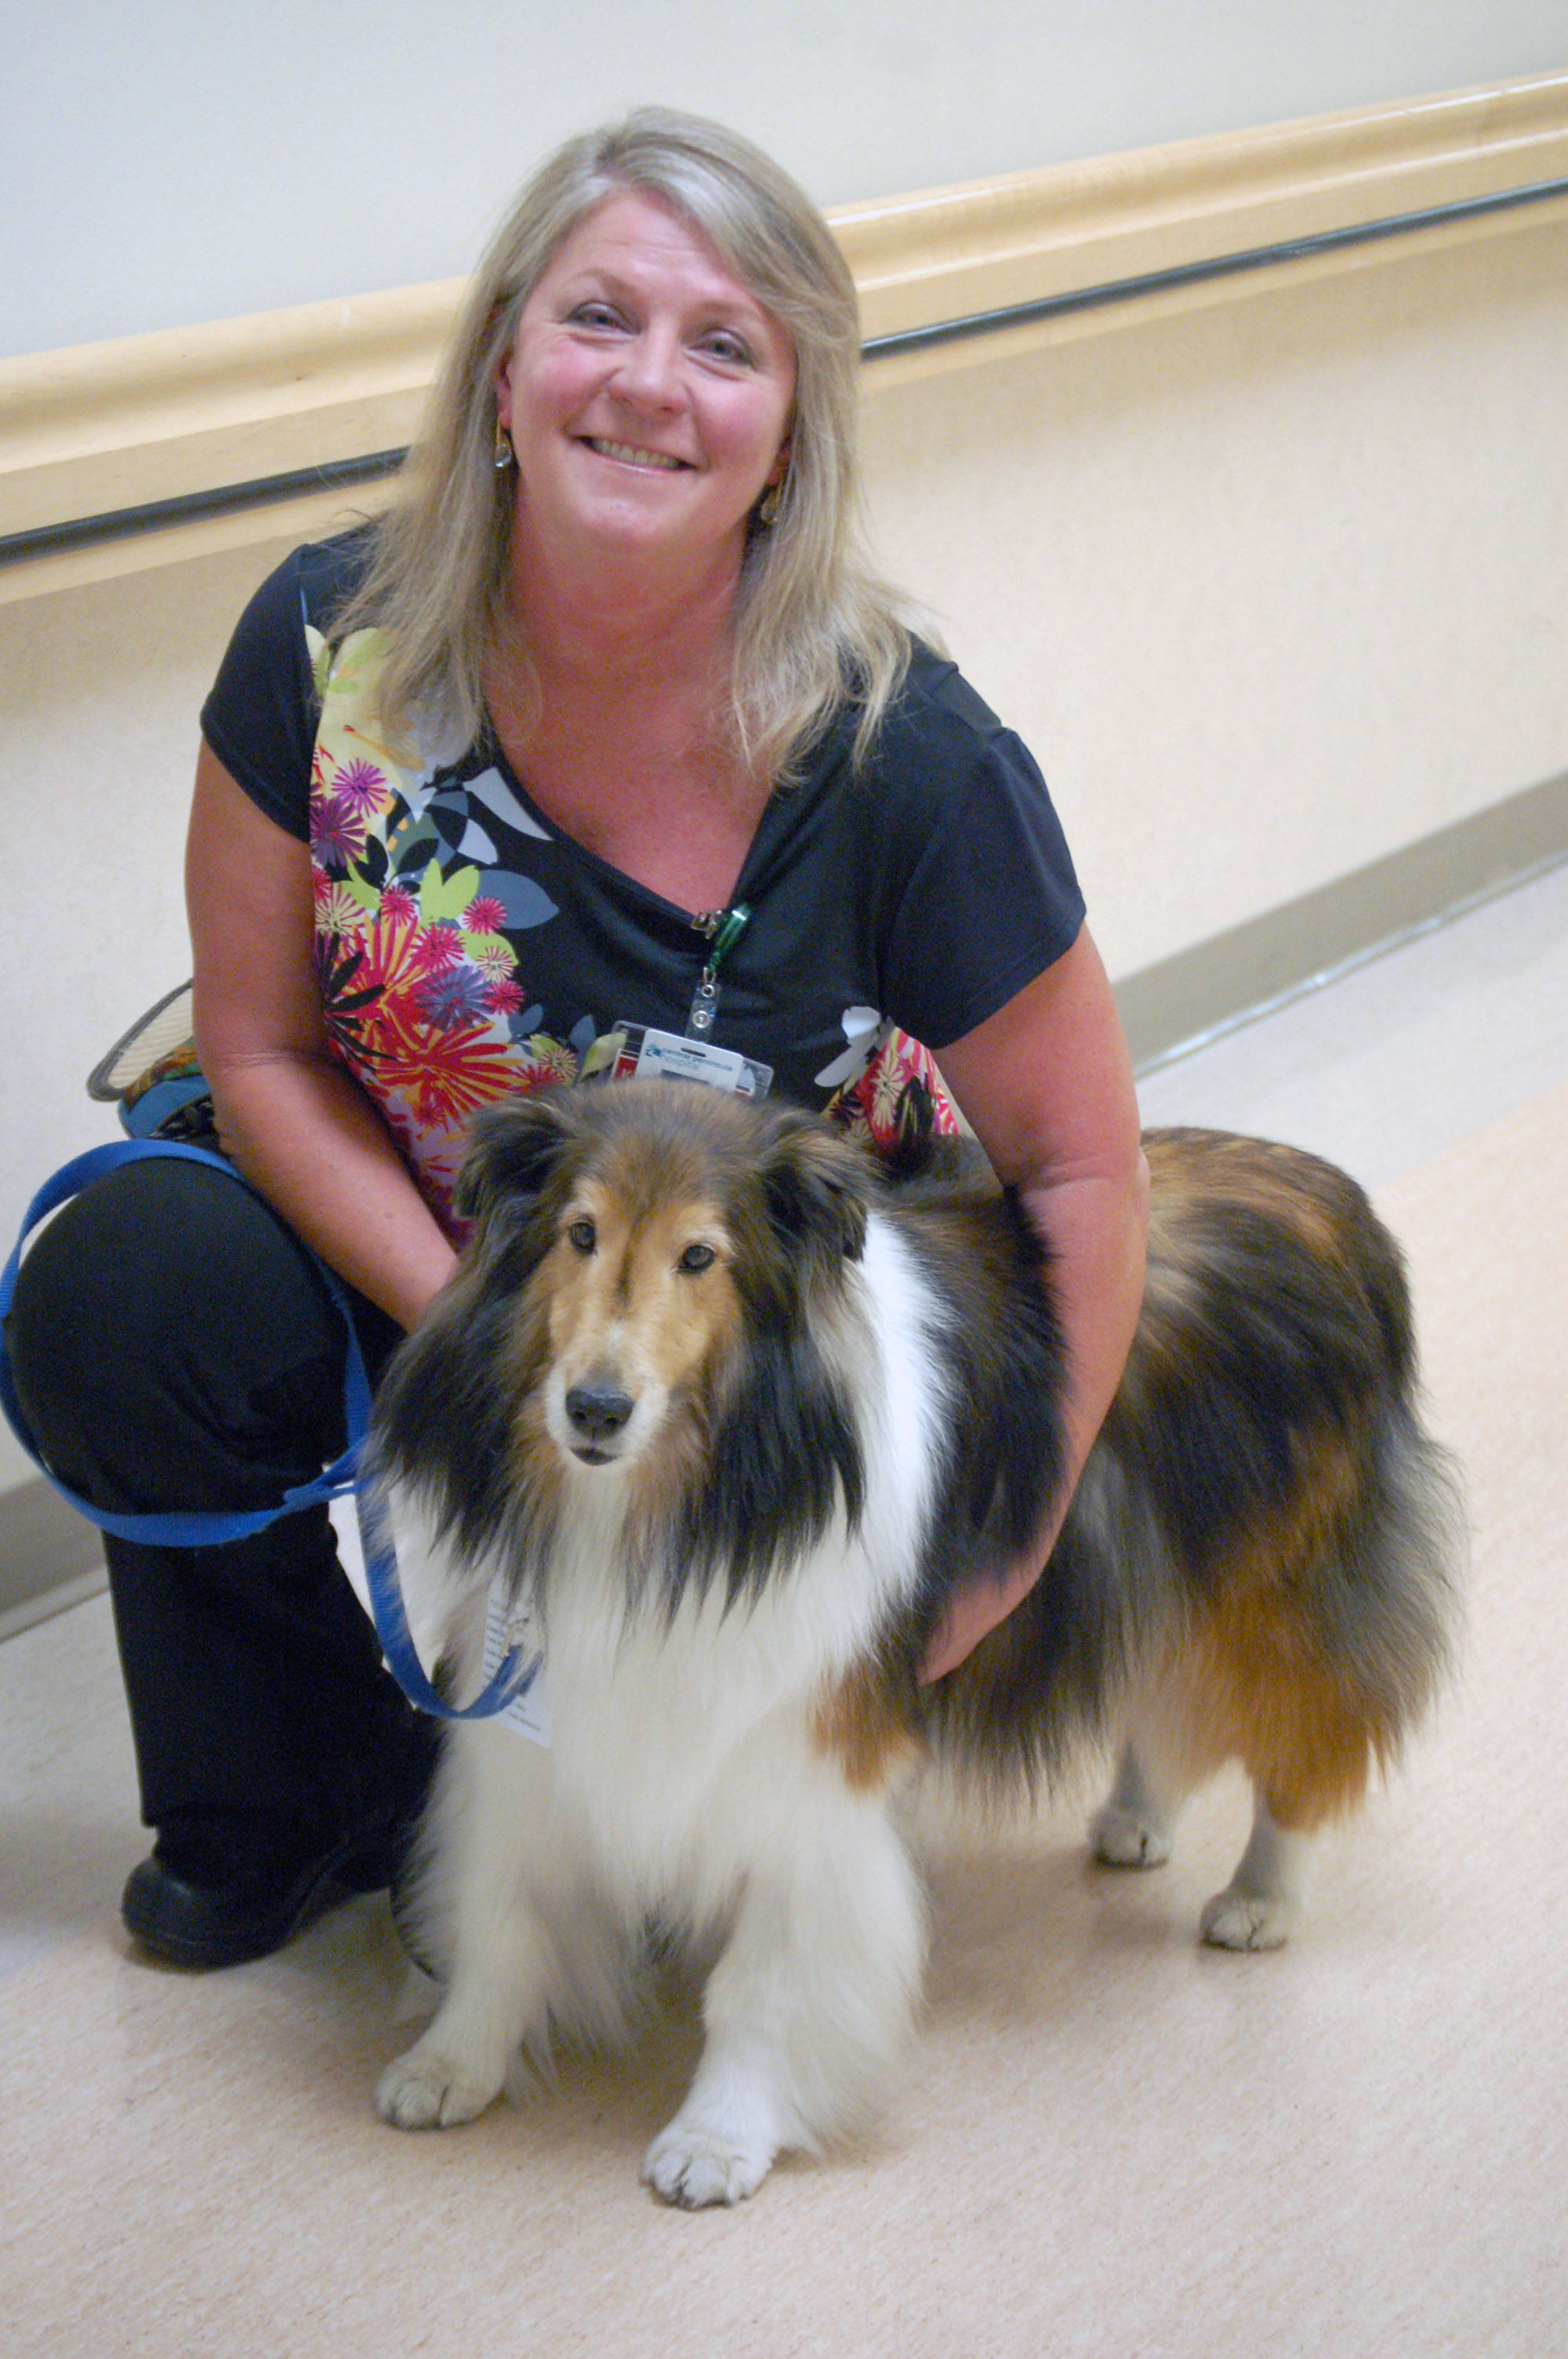 Kelley Kress and her dog, Kody, pose at Central Peninsula Hospital on Thursday, Aug. 23, 2018, in Soldotna, Alaska. Kress and Kody volunteer as part of the hospital auxiliary’s pet therapy program. (Photo by Erin Thompson/Peninsula Clarion)